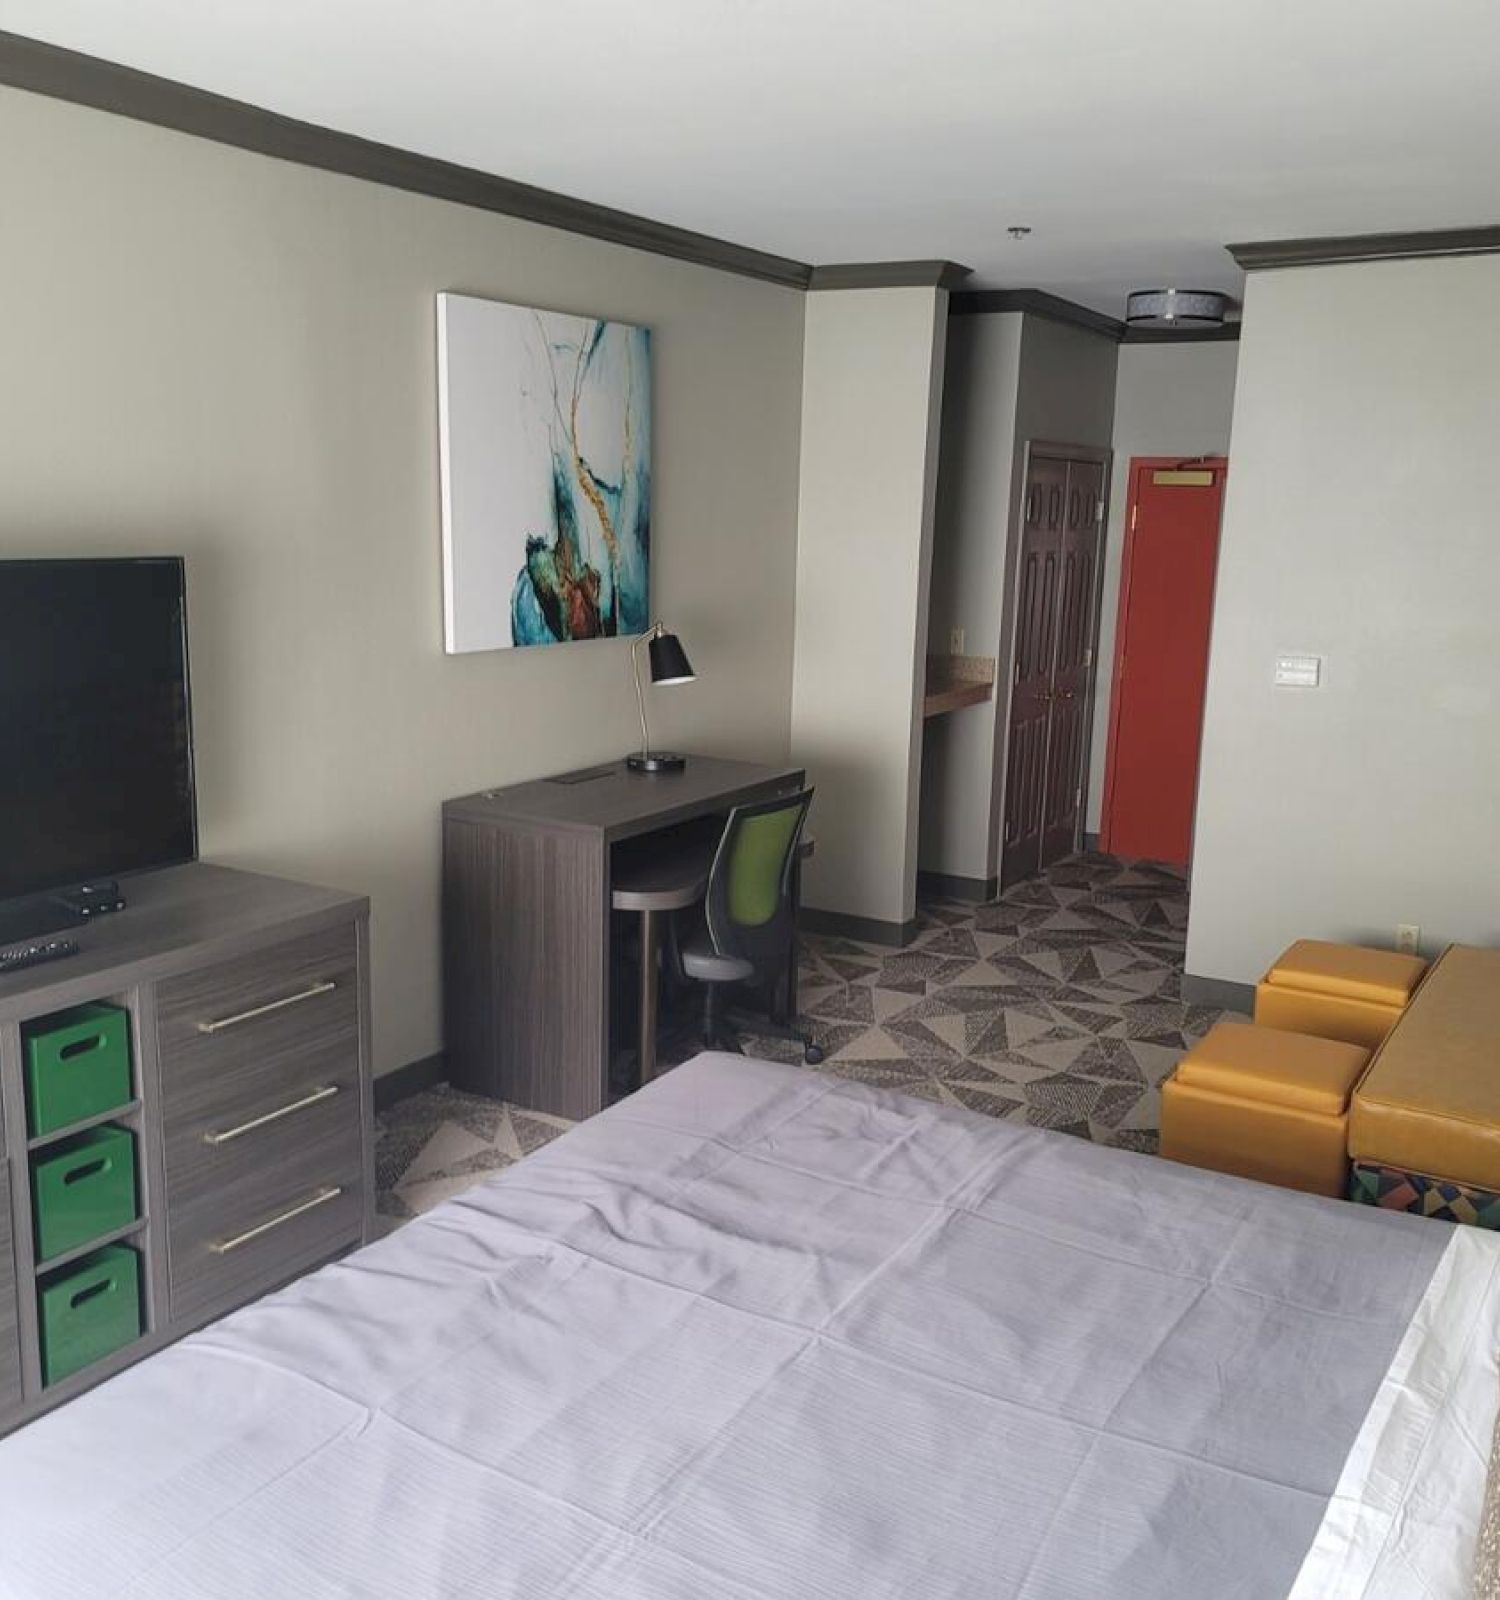 A modern hotel room features a bed, TV, dresser, desk with chair, colorful sofa, and abstract wall art. The room has neutral colors.